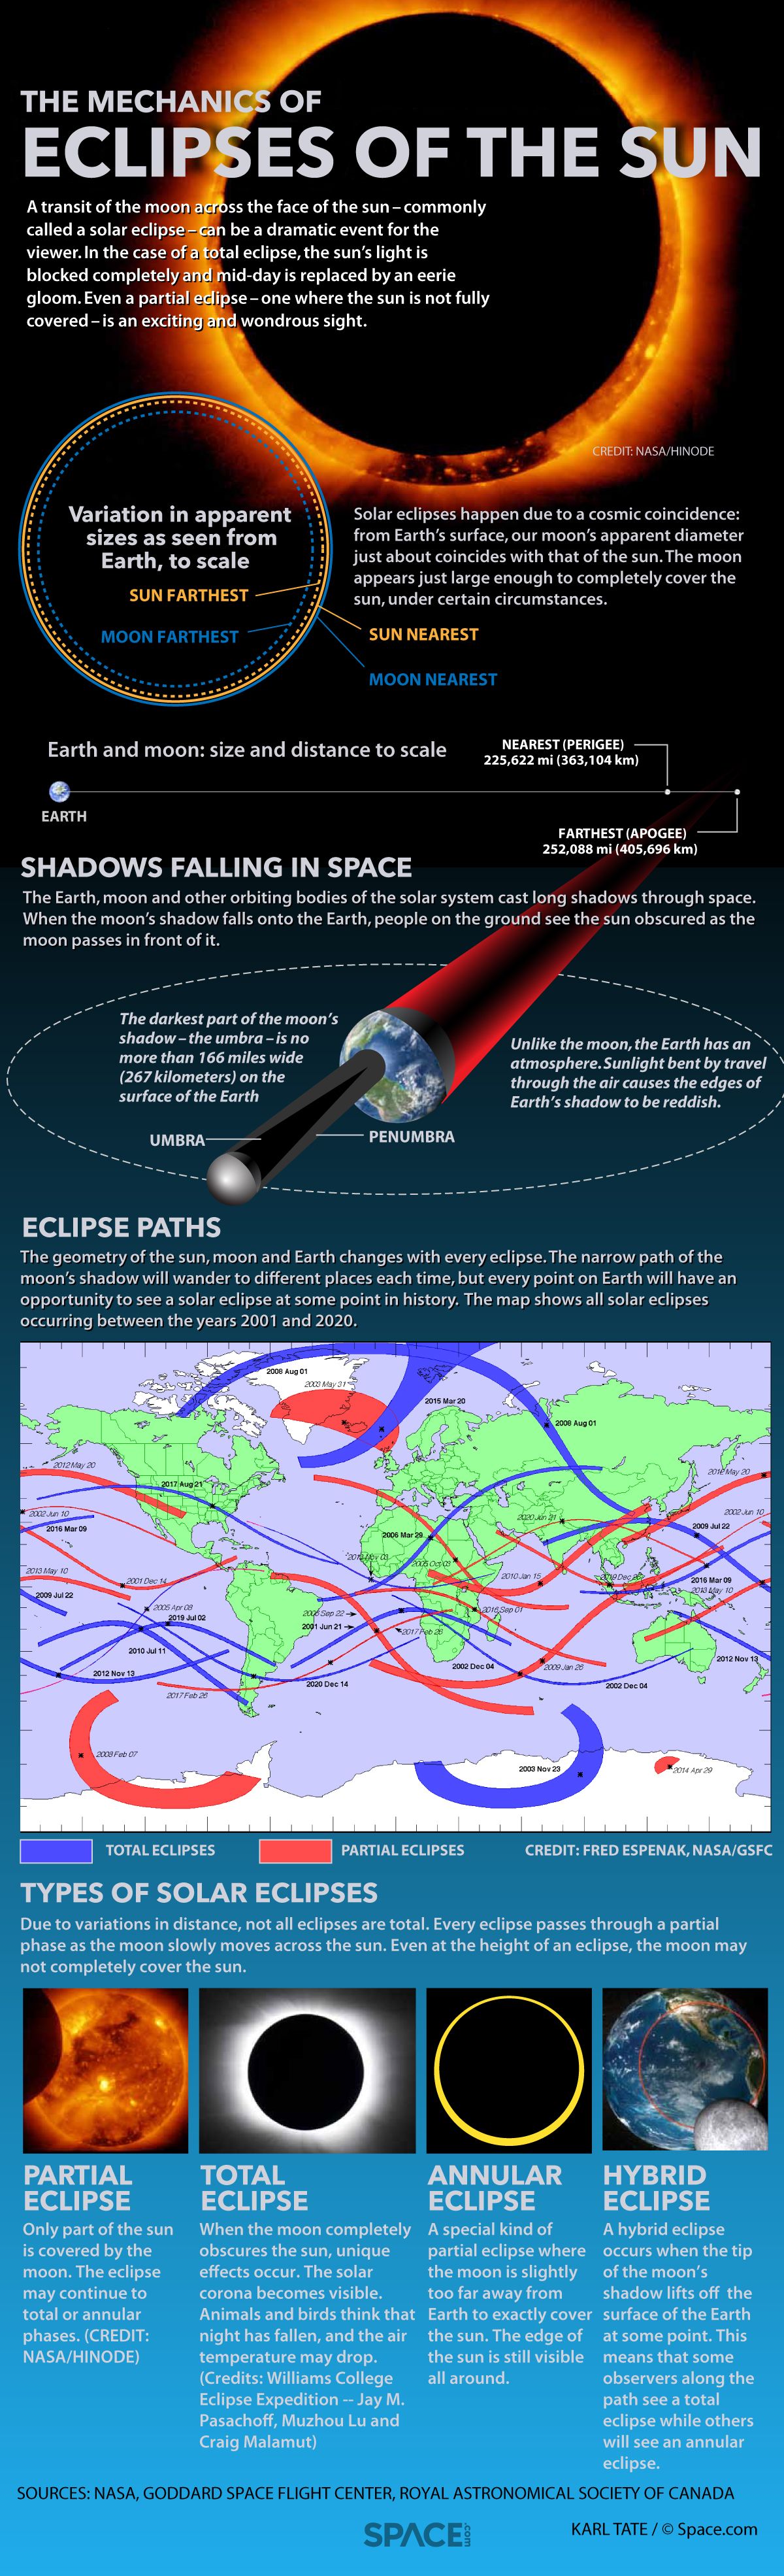 solar-eclipses-an-observer-s-guide-infographic-space